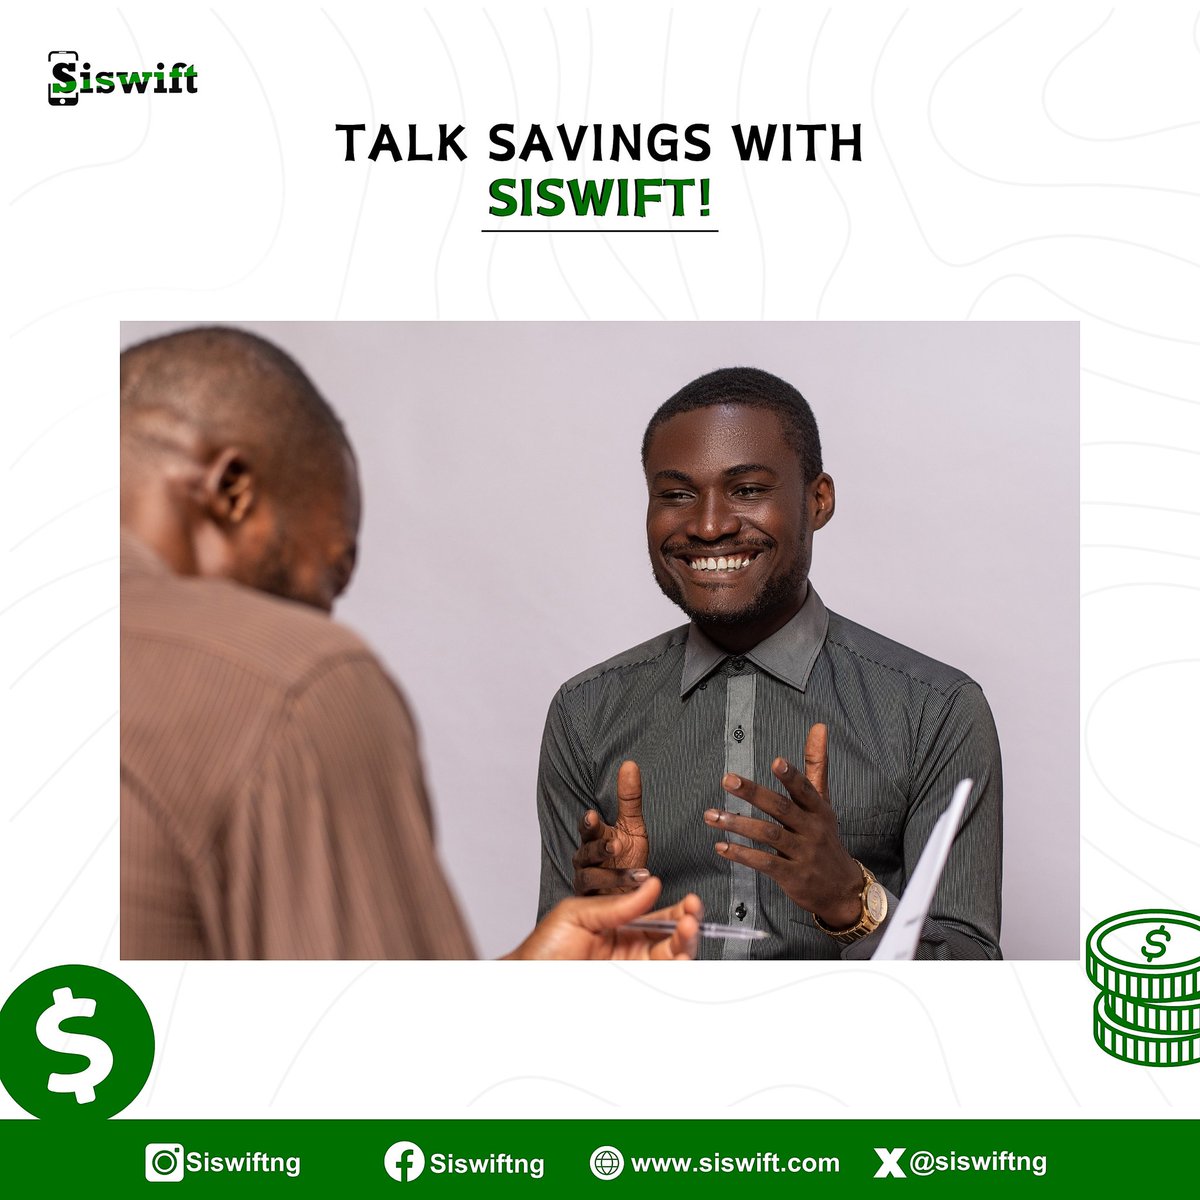 Talk savings with Siswift! 

Join the discussion for better deals! 
.
.
.
#Siswift #TalkSavings #transparenttransactions #negotiationpower #changingthegame #convenience #convenienceoverfixedprices #digitalmarketing #iphones #phones